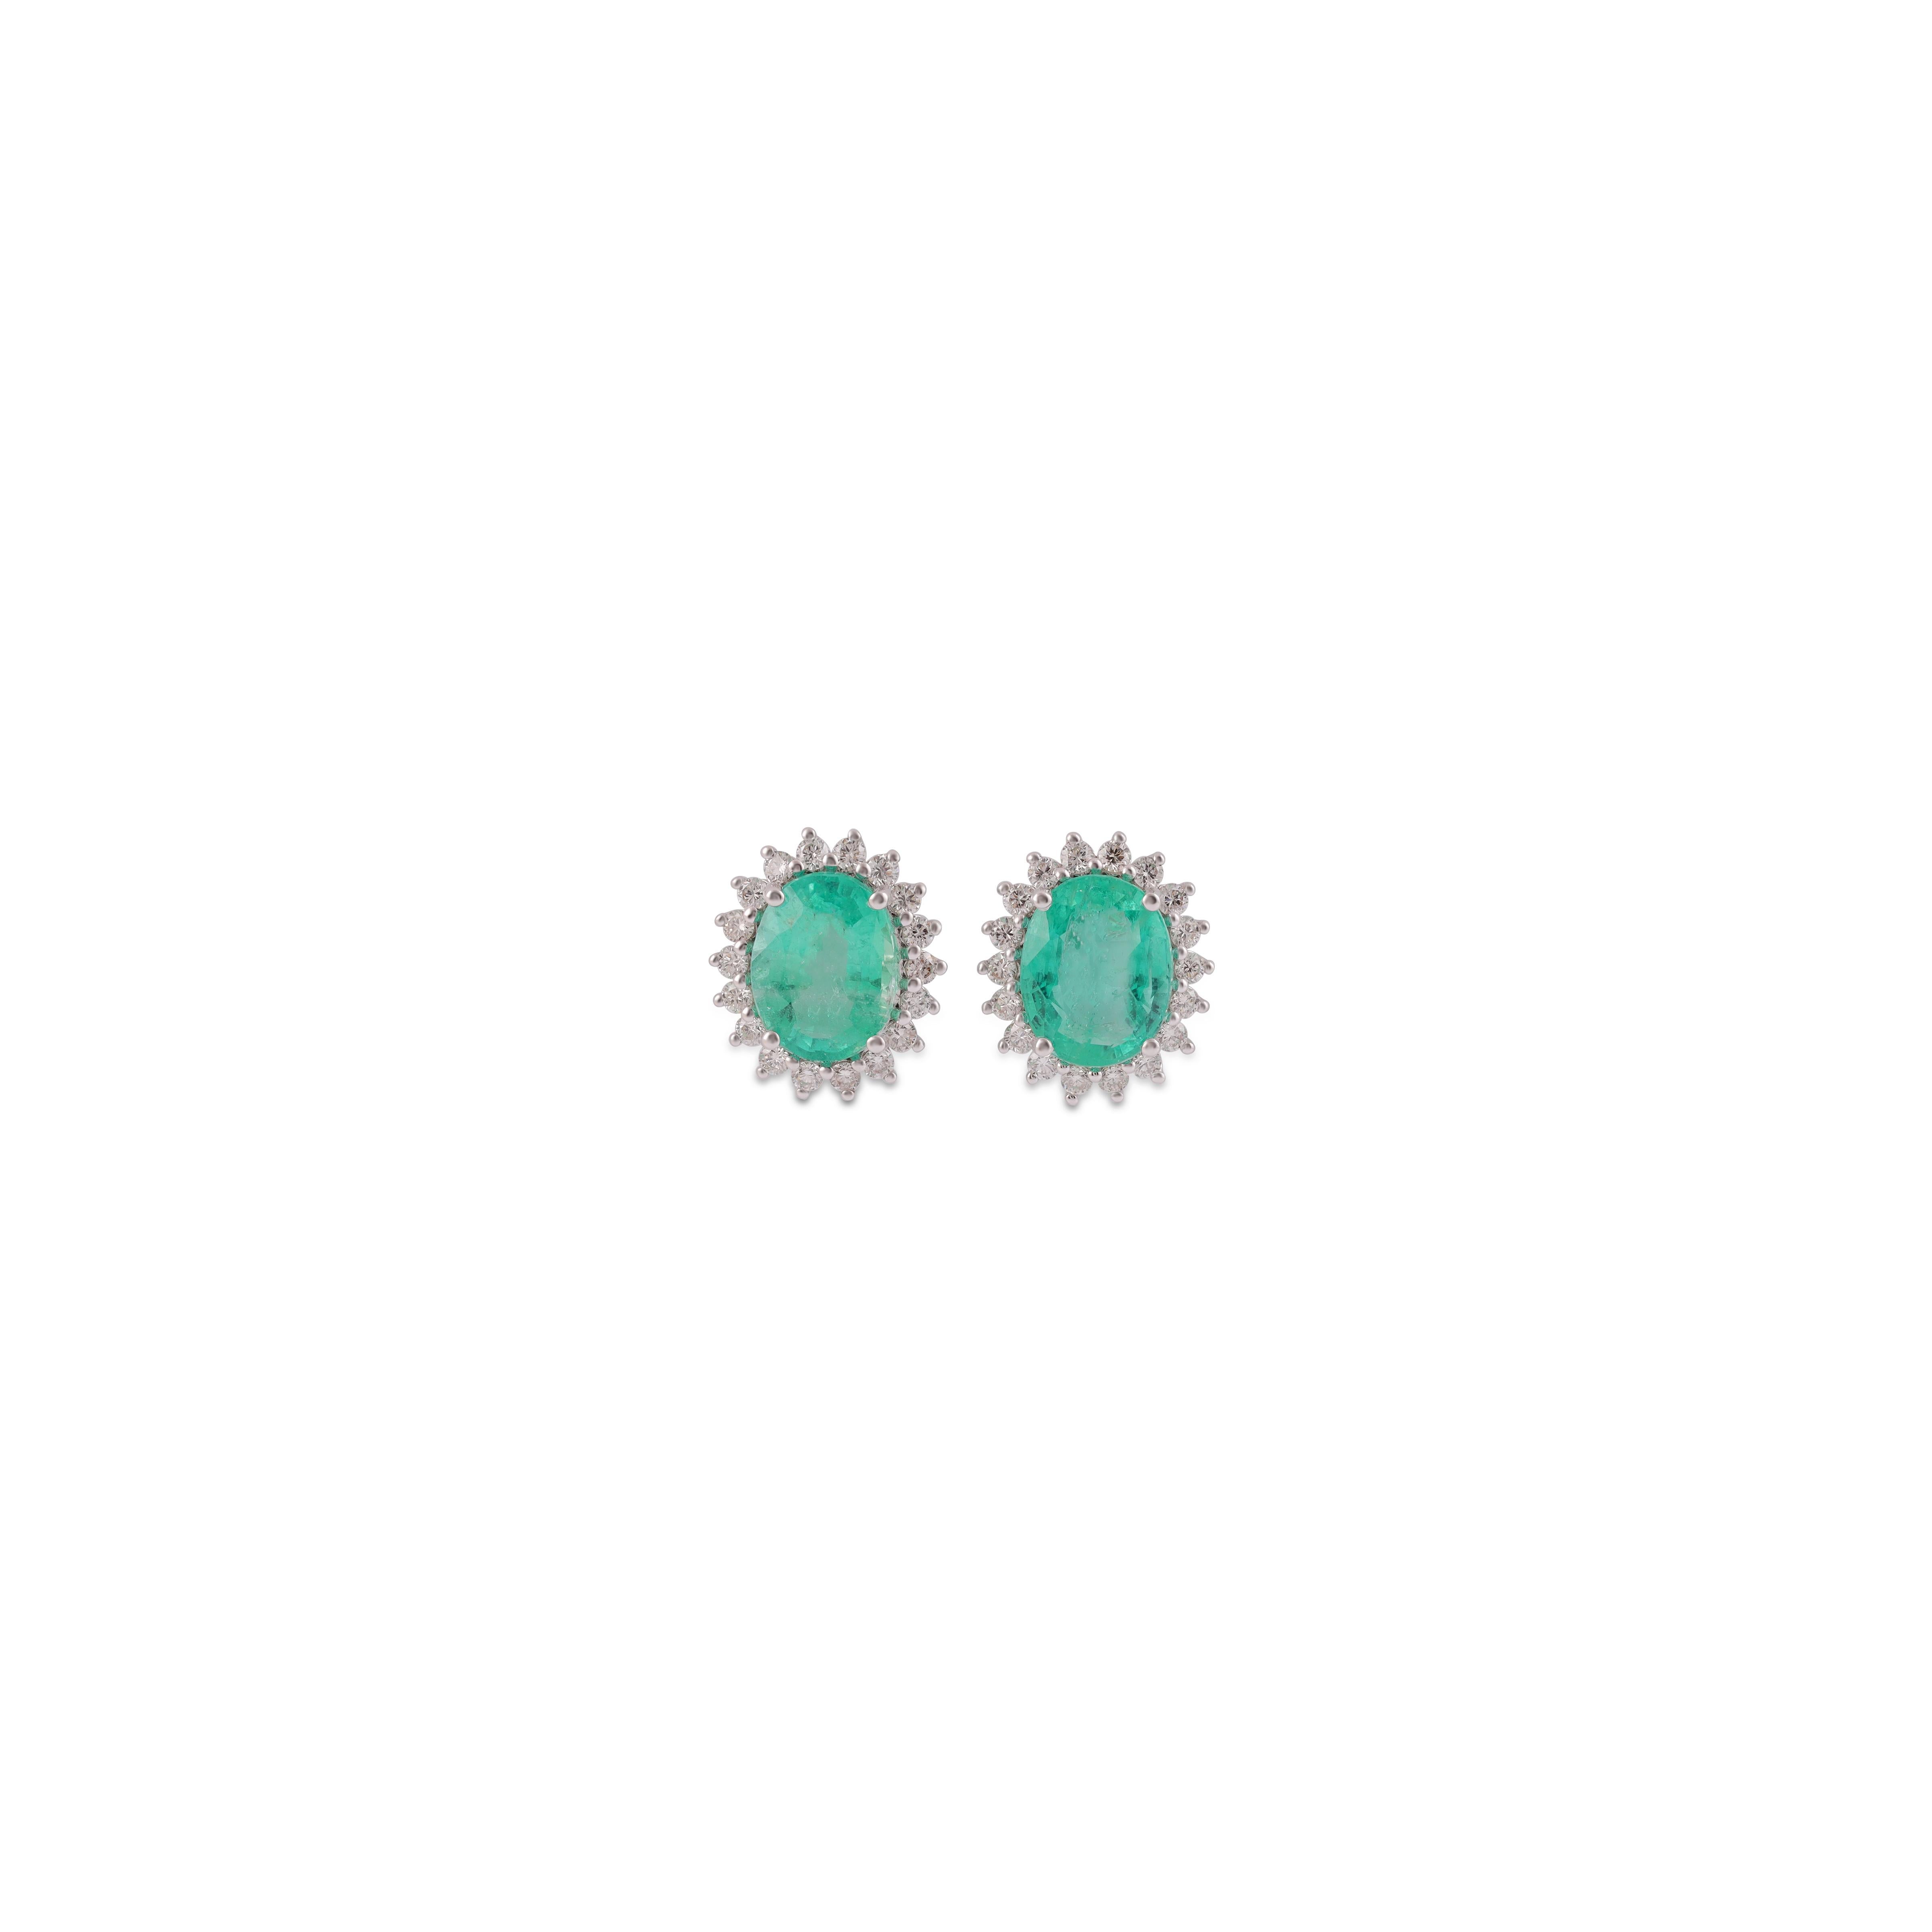 This is an elegant emerald & diamond Earring studded in 18k White gold with 2 piece of oval Cut  shaped Zambian emerald weight 4.09 carat which is surrounded by 36 pieces of round shaped diamonds weight 0.51 carat, this entire Earring studded in 18k